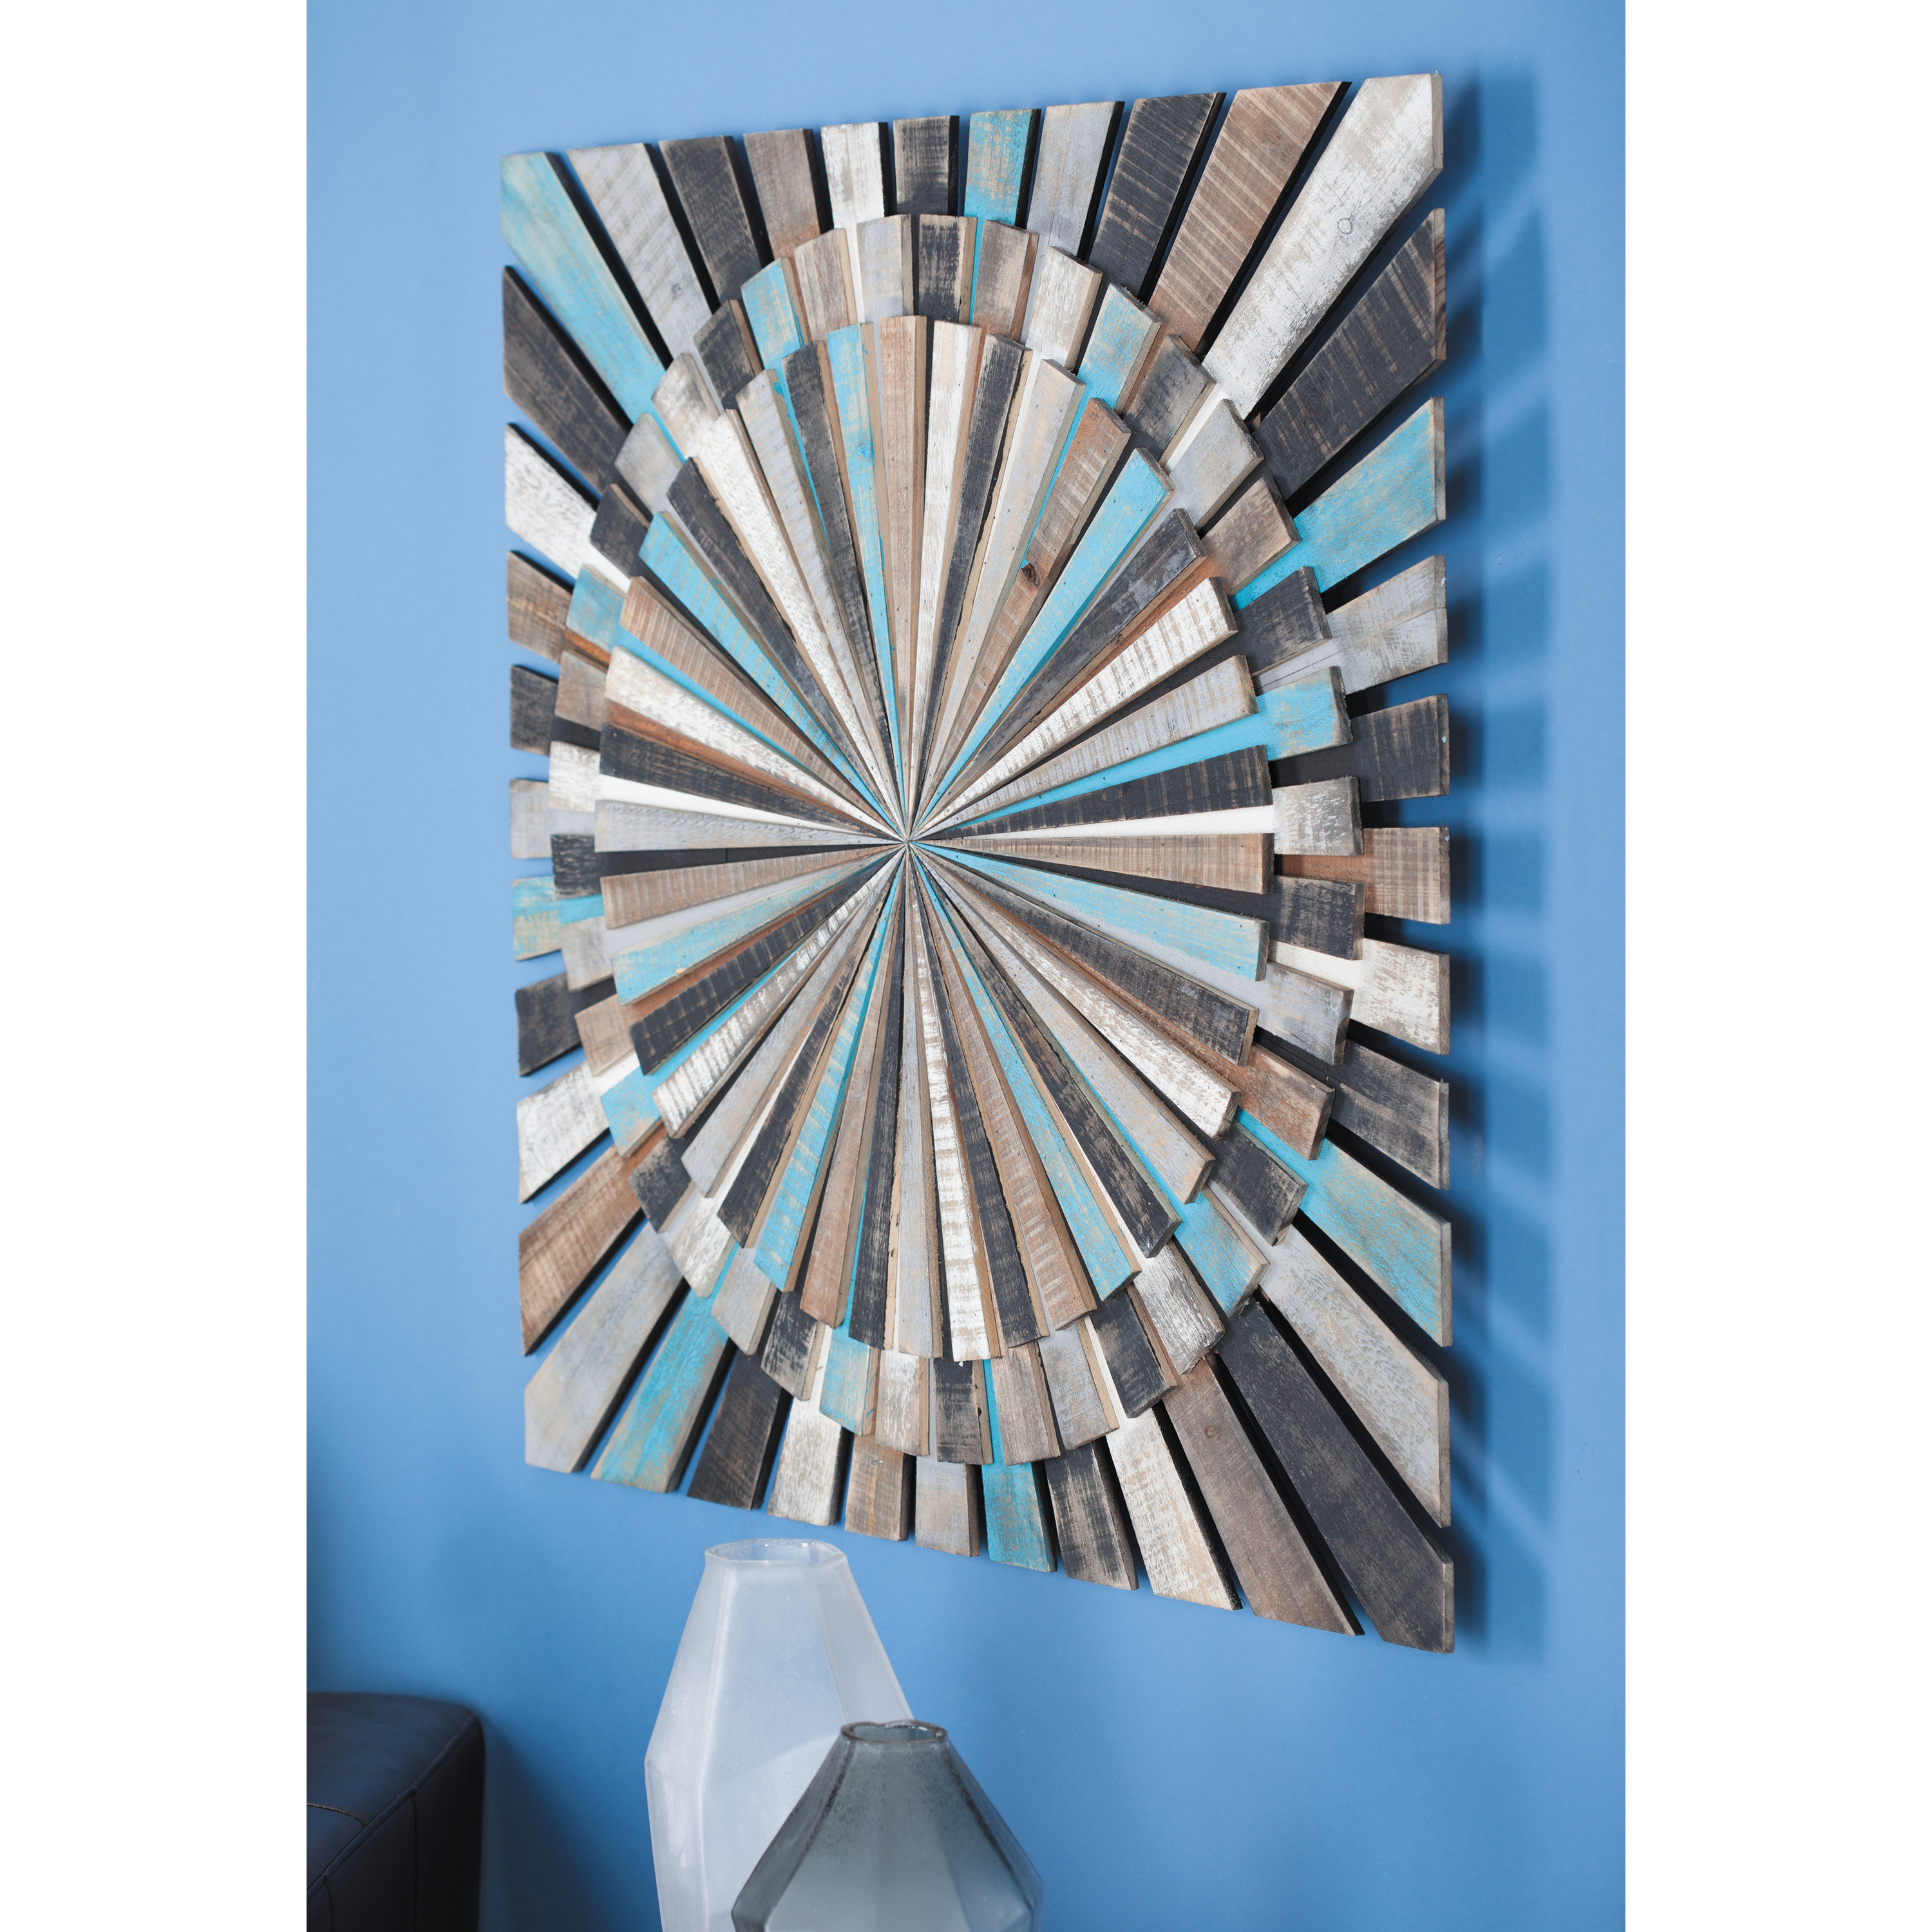 DecMode Multi Colored Wood Handmade Carved Starburst Wall Decor - image 2 of 13